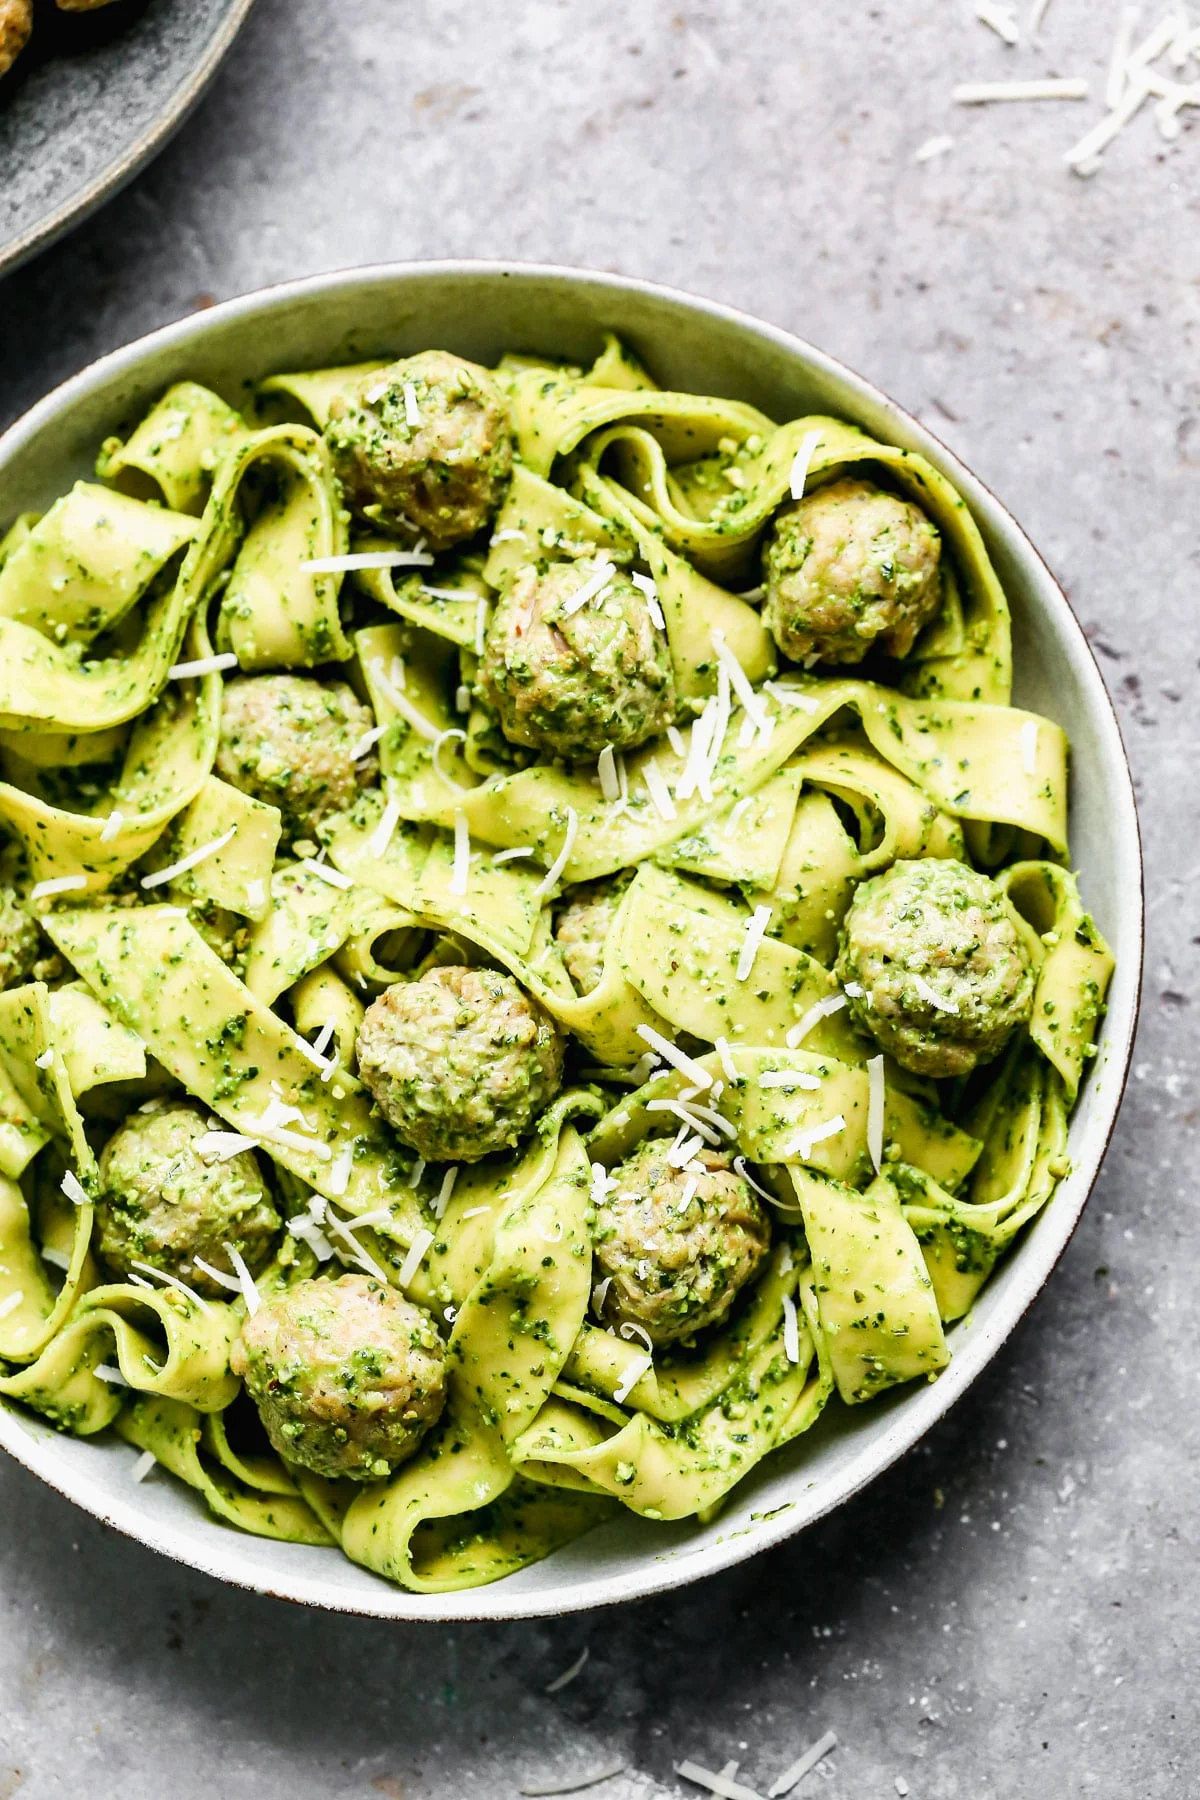 Twirly noodles tossed in a five-minute kale pesto, tender chicken meatballs, and plenty of nutty parmesan are the makings of our new favorite throw-it-together weeknight meal – Kale Pesto Pasta. Just because it's winter, doesn't mean we have to leave homemade pesto behind. Swapping out hearty wintery kale for a portion of the pesto brings a little seasonal aspect to our pesto and using crunchy almonds instead of pine nuts make this easy meal pocket-friendly as well.&nbsp;